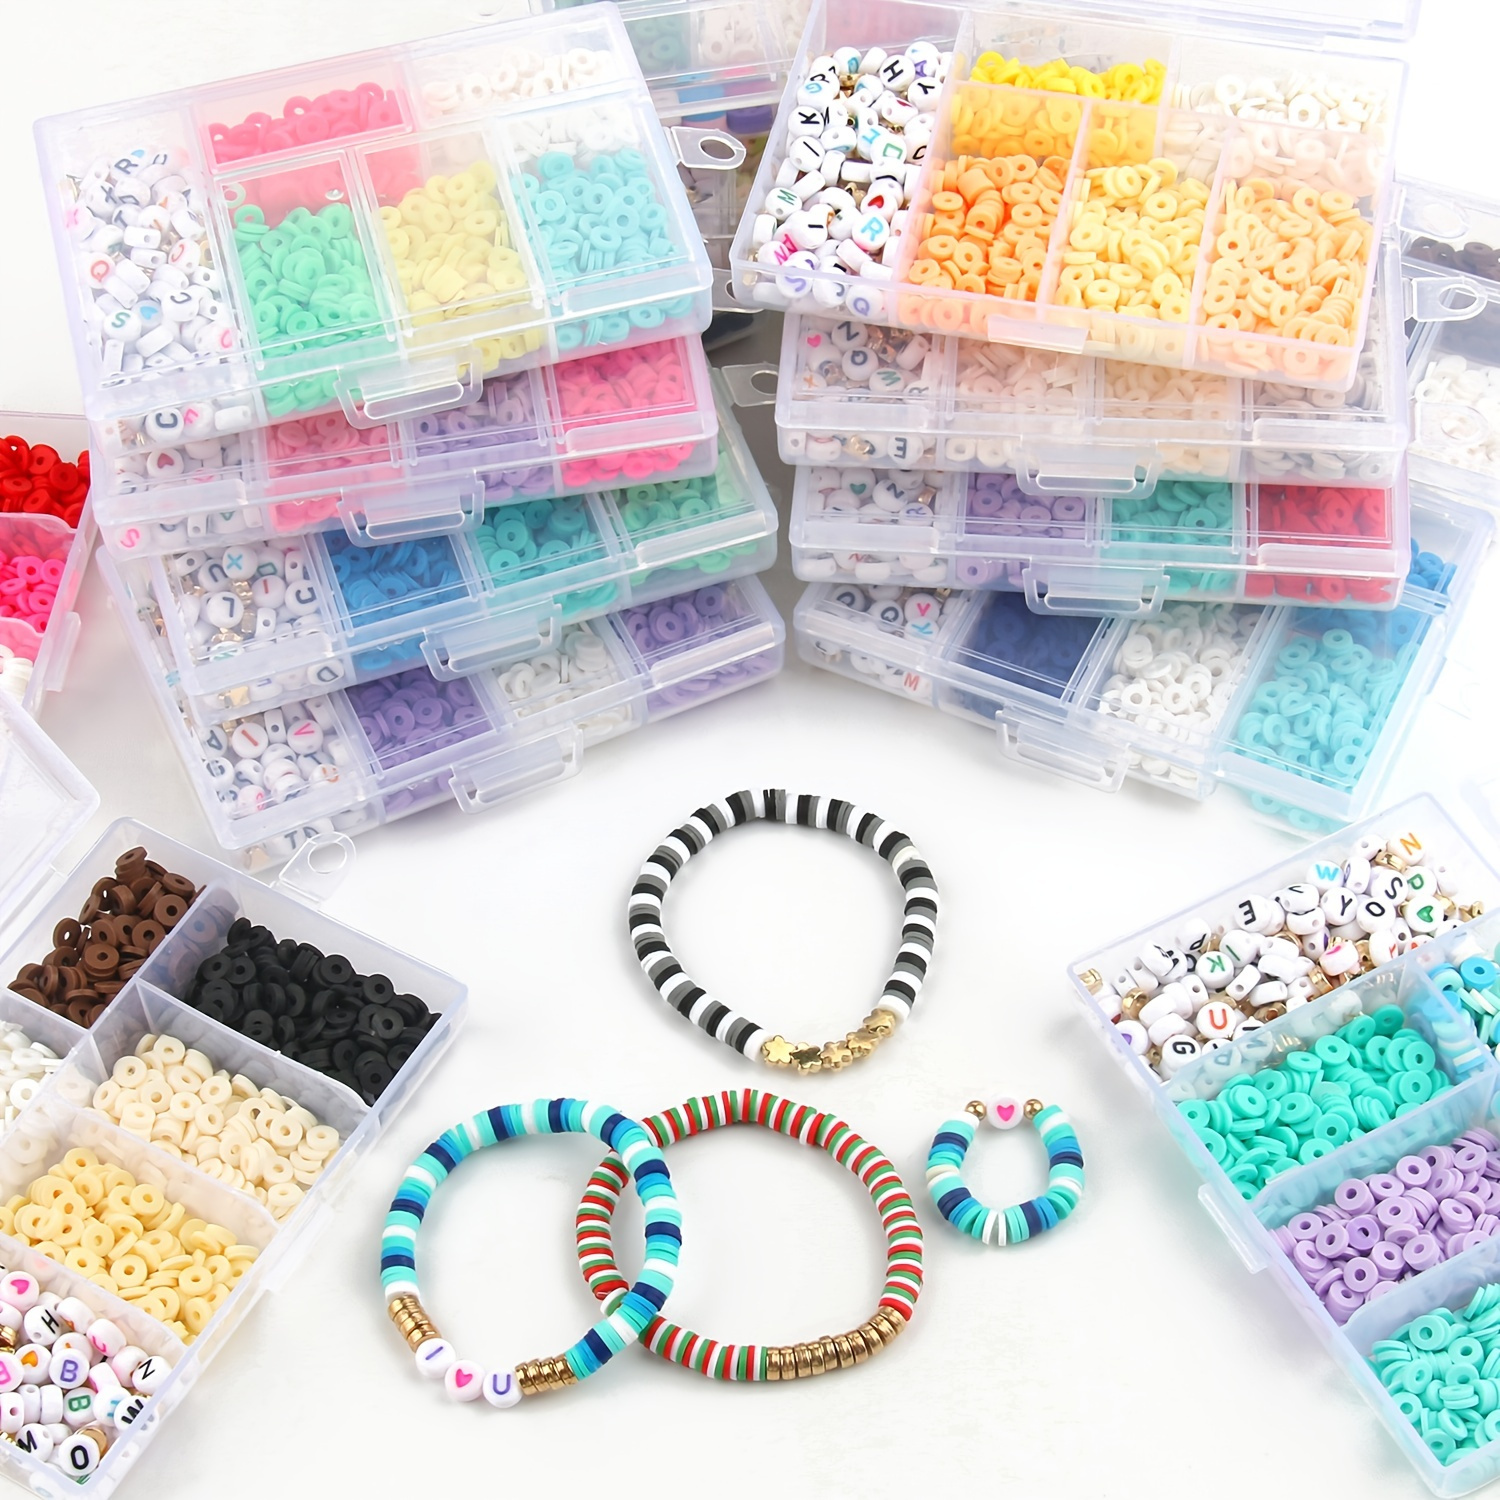 Jewellery Bracelet Making Kit Diy 56 Piece Adult Charms & Beads in Gift Box